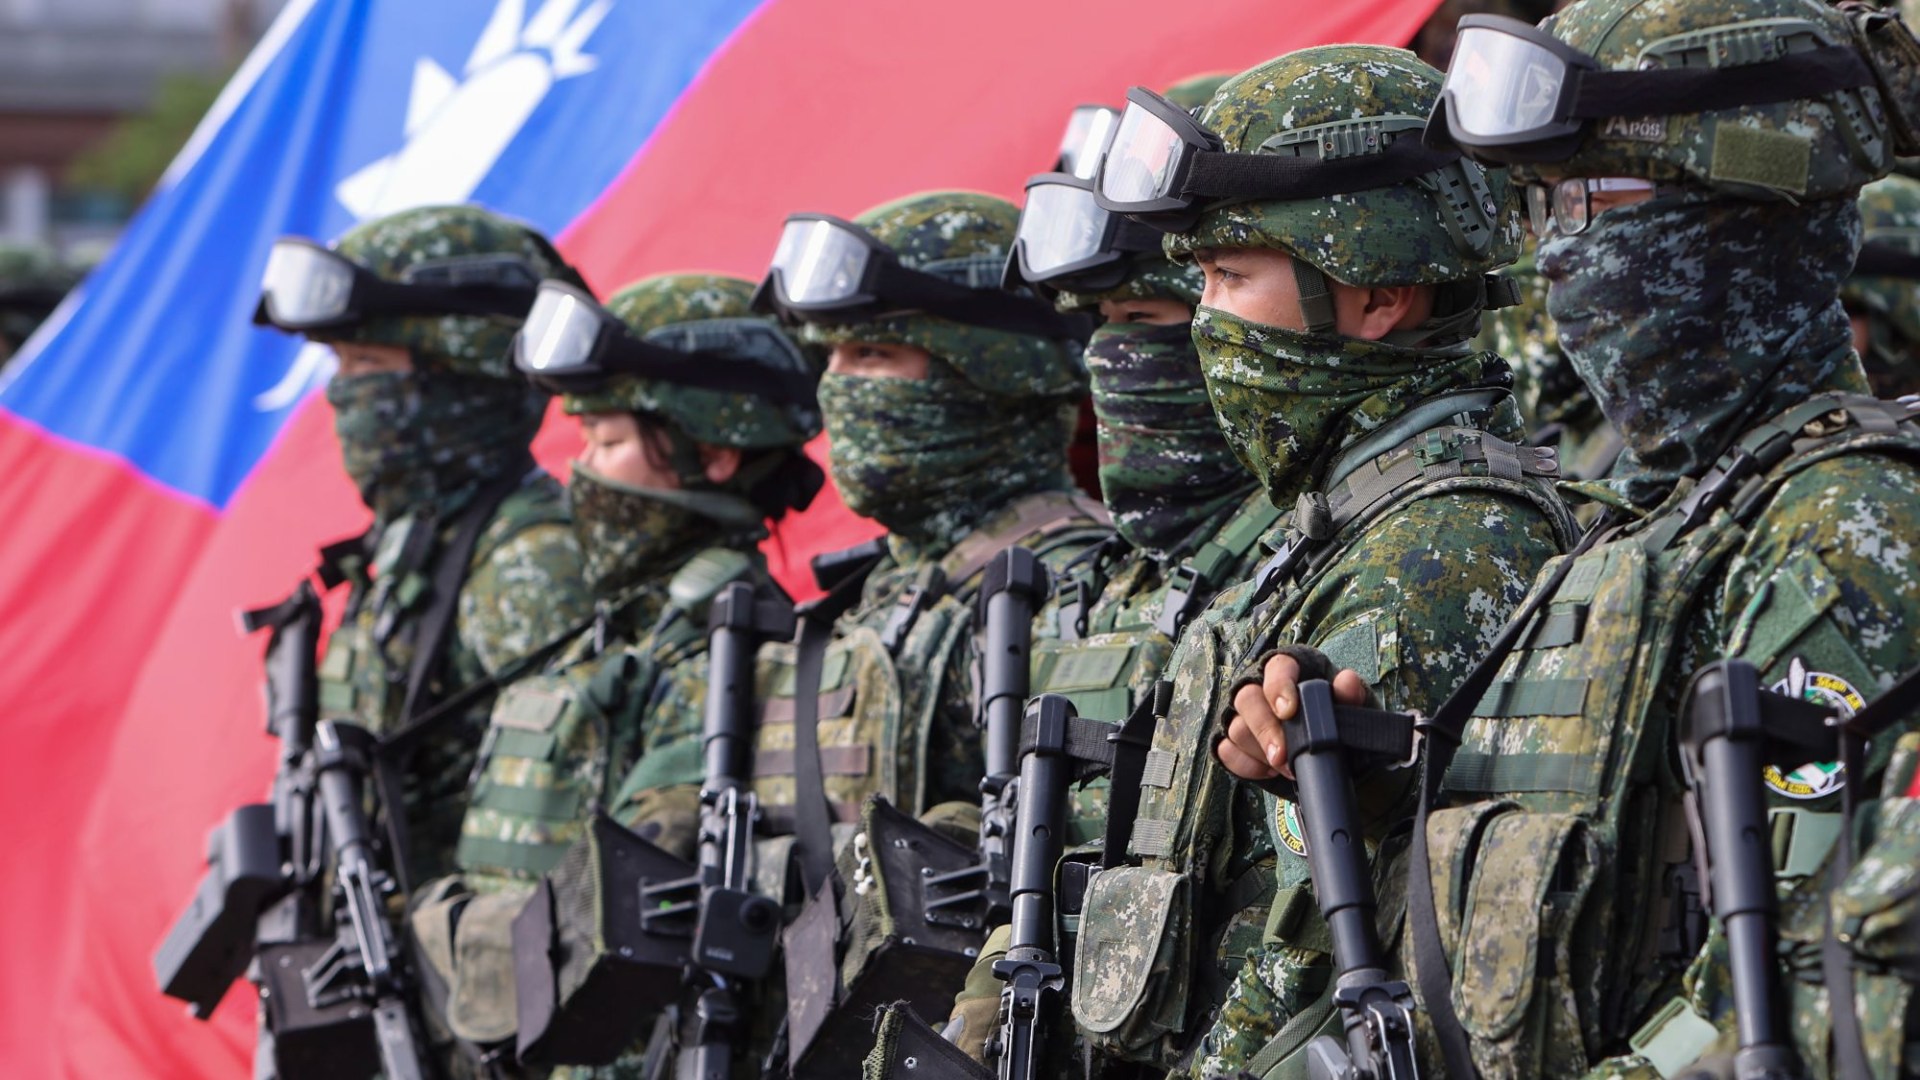 Taiwan is preparing for war – we KNOW China is plotting surprise attack and learning from Putin, foreign minister warns [Video]